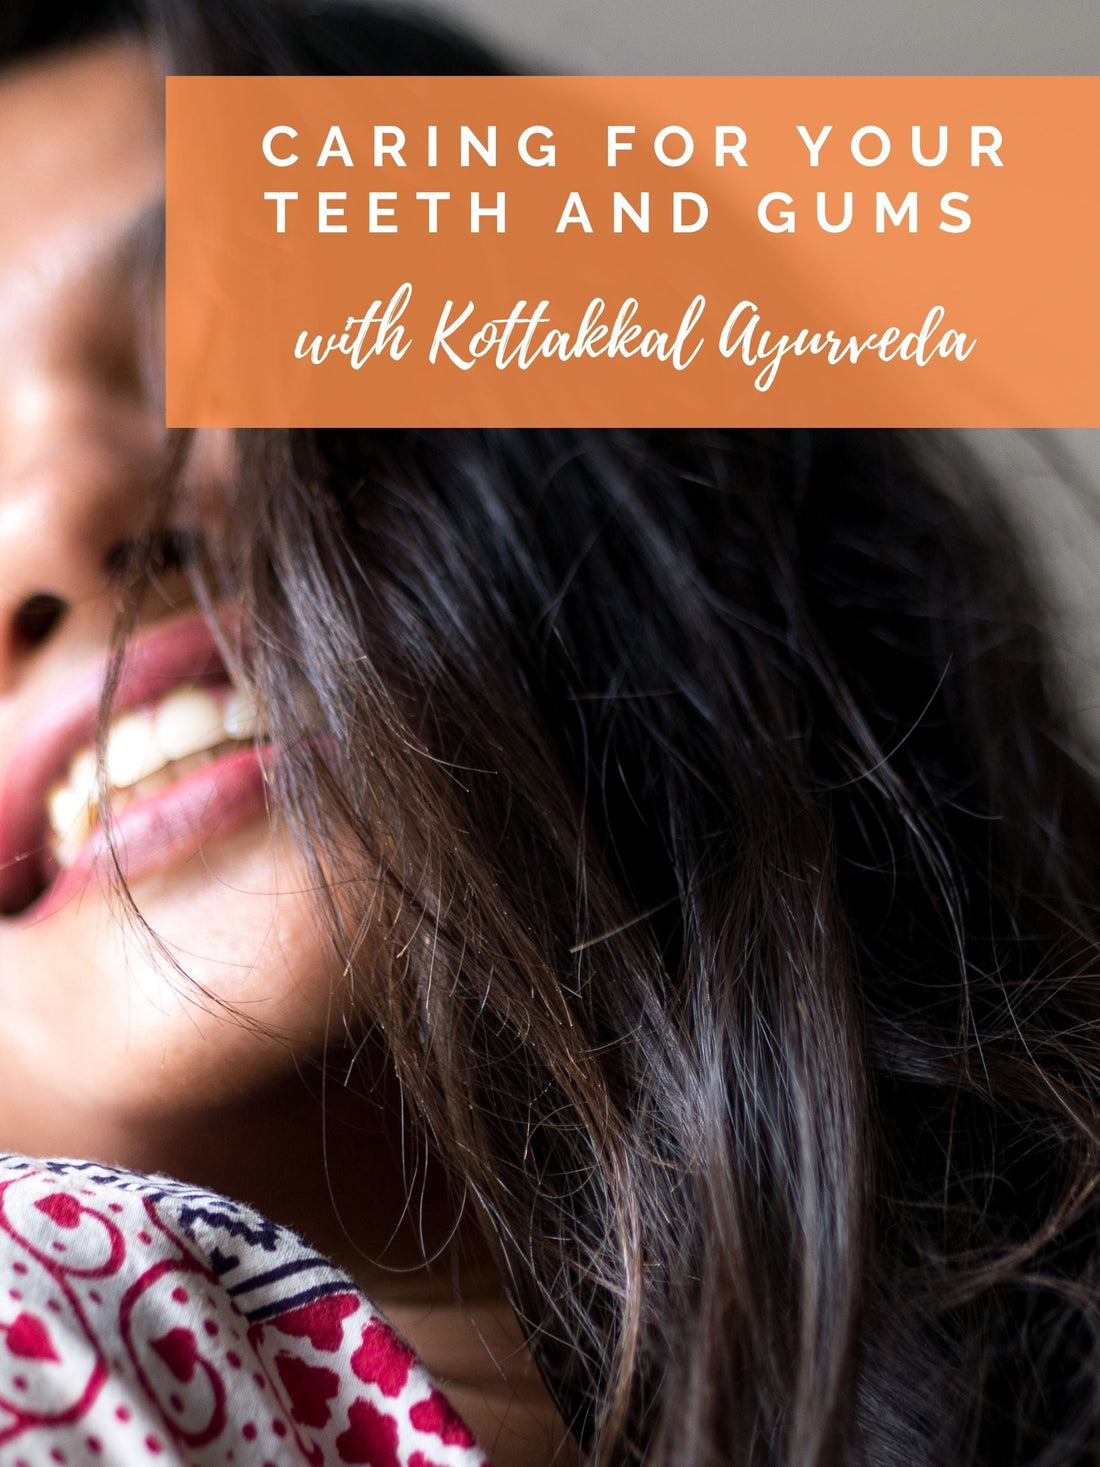 Caring For Your Teeth and Gums with Kottakkal